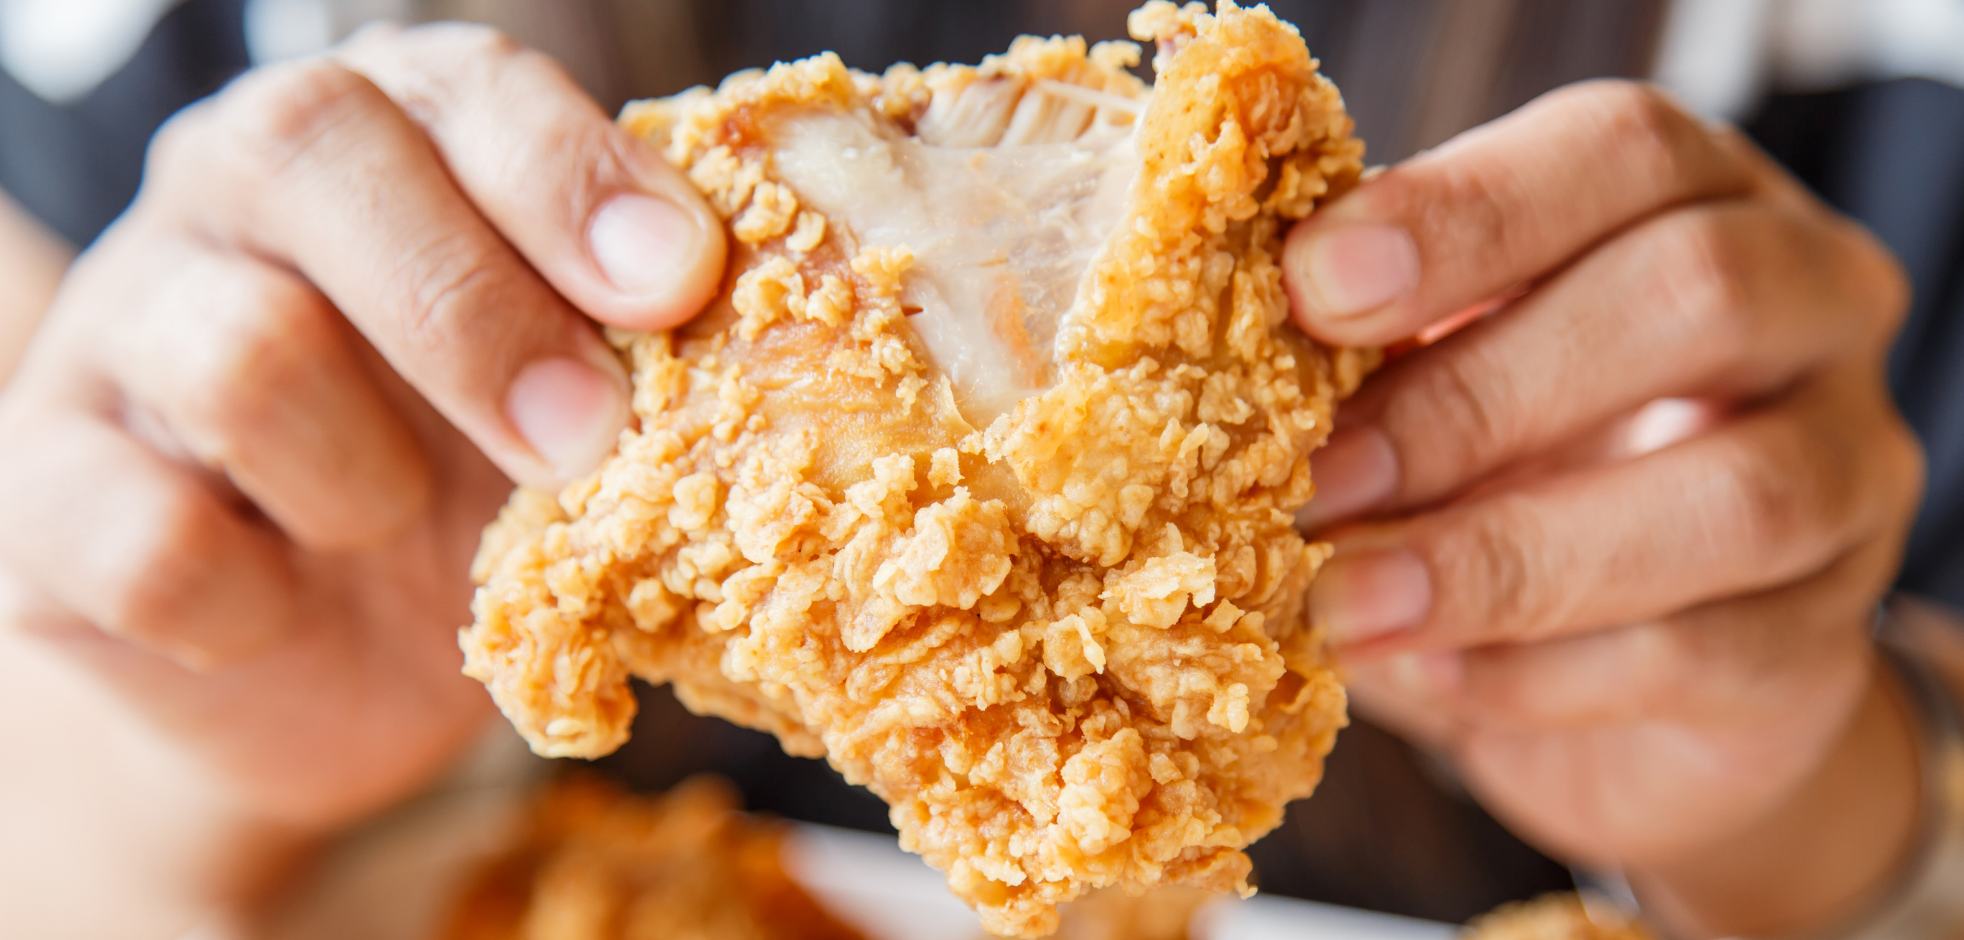 hand pulling apart a piece of fried chicken